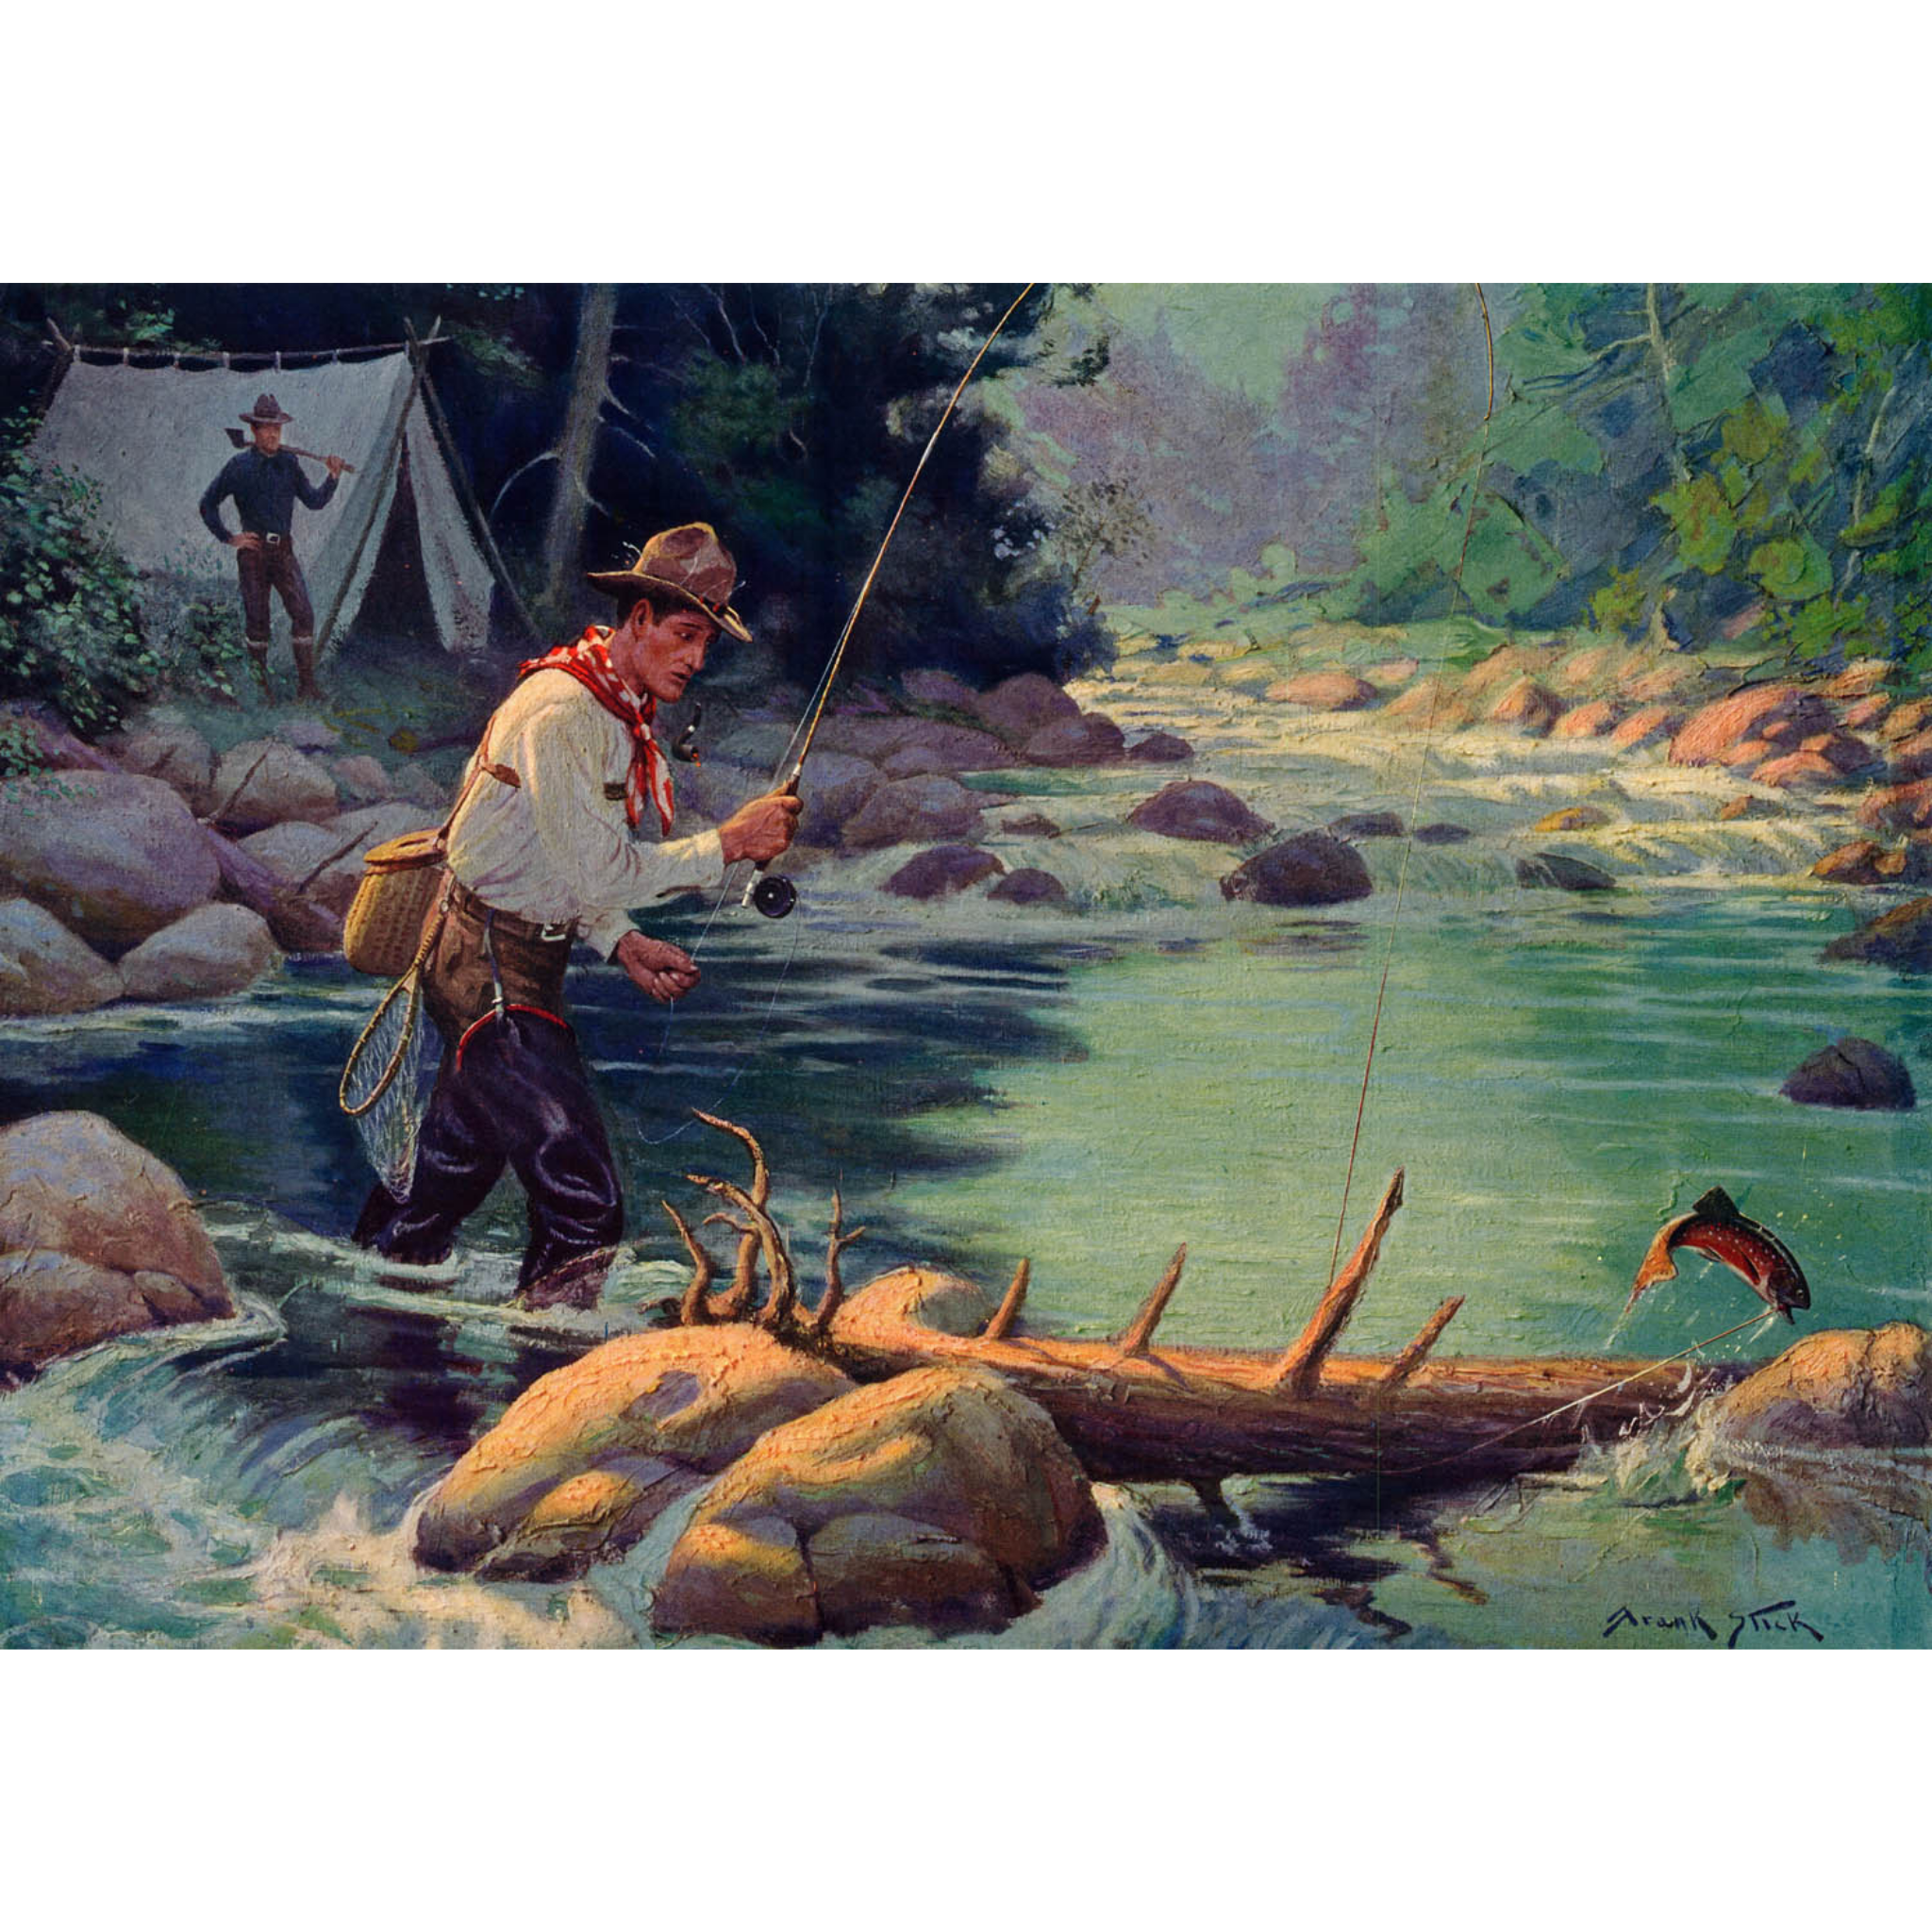 Man Fishing by Camp - ca. 1925 Frank Stick Lithograph – Architect's Wife